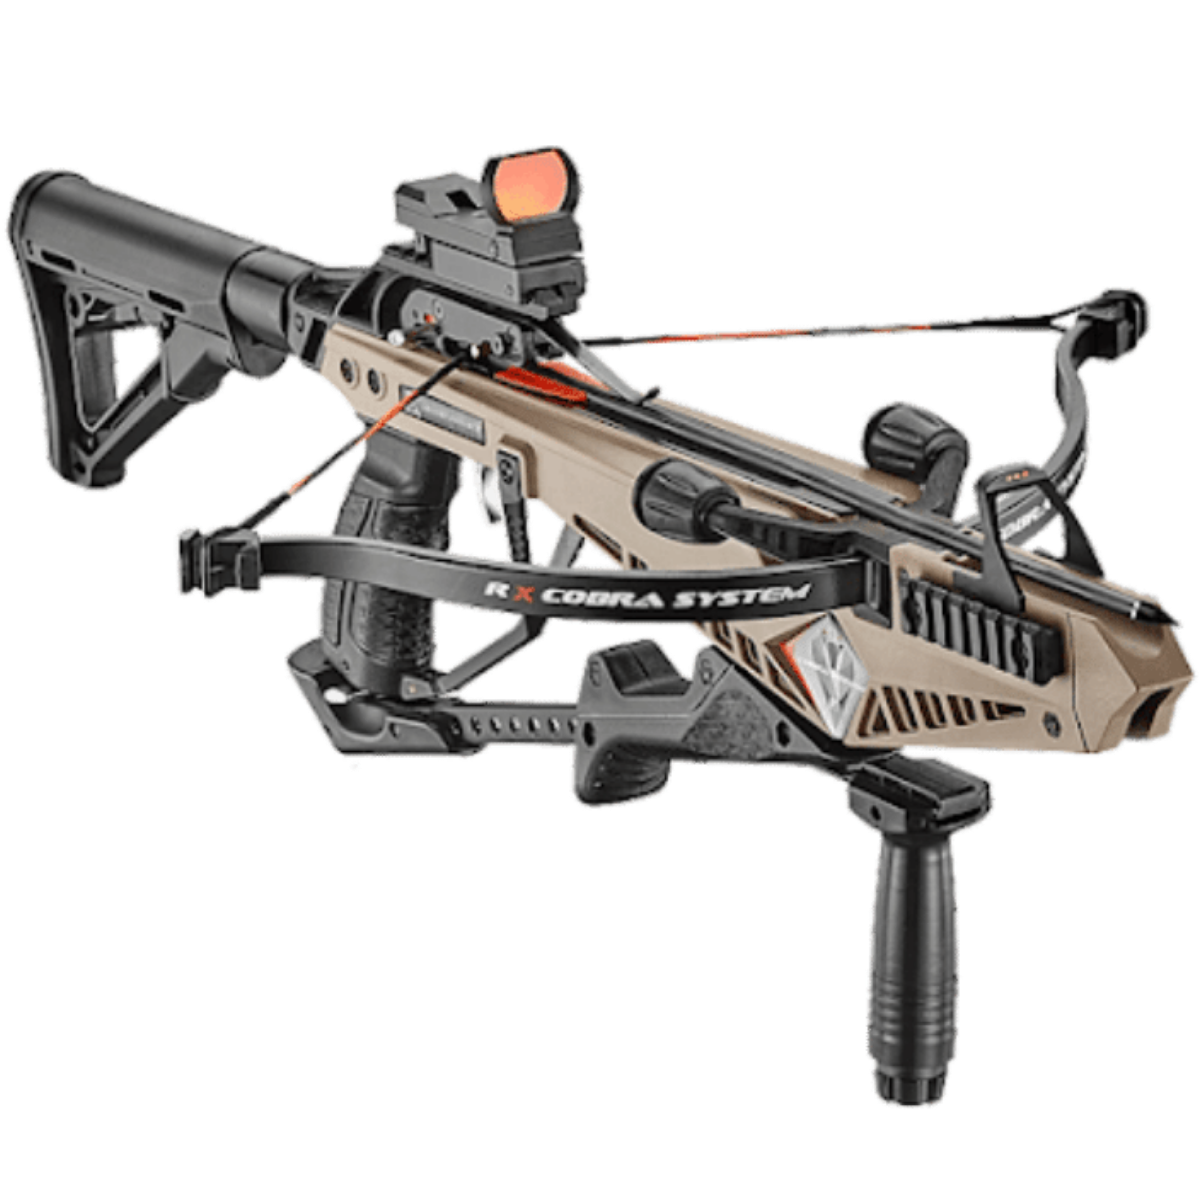 EK Archery Cobra R9 RX Self-Repeating Crossbow Package 130lb - Fast UK Shipping | Tactical Archery UK